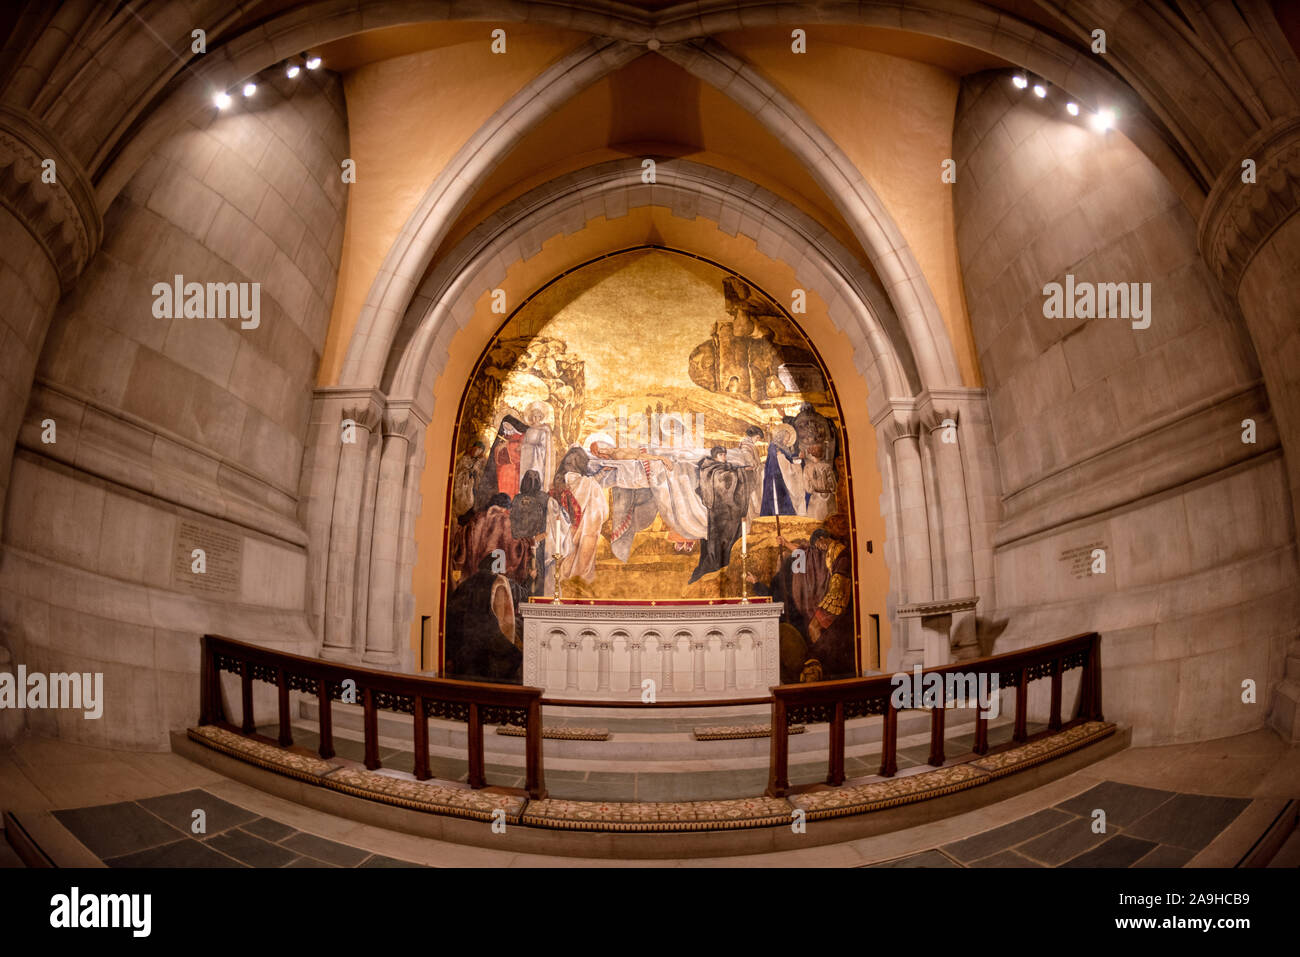 WASHINGTON, DC - The altar in the Chapel of St. Joseph of Arimathea in the crypt of Washington National Cathedral. Washington National Cathedral is an Episcopal church located in Washington DC and is the site of many of Washington DC's prominent church and remembrance services. Designed in the Neo-Gothic style, its construction was begun in 1906, with work continuing over following decades. It is the second-largest church building in the United States and stands as the fourth-tallest structure in Washington DC, a feature emphasized by sitting on a high point overlooking over the city. It is be Stock Photo